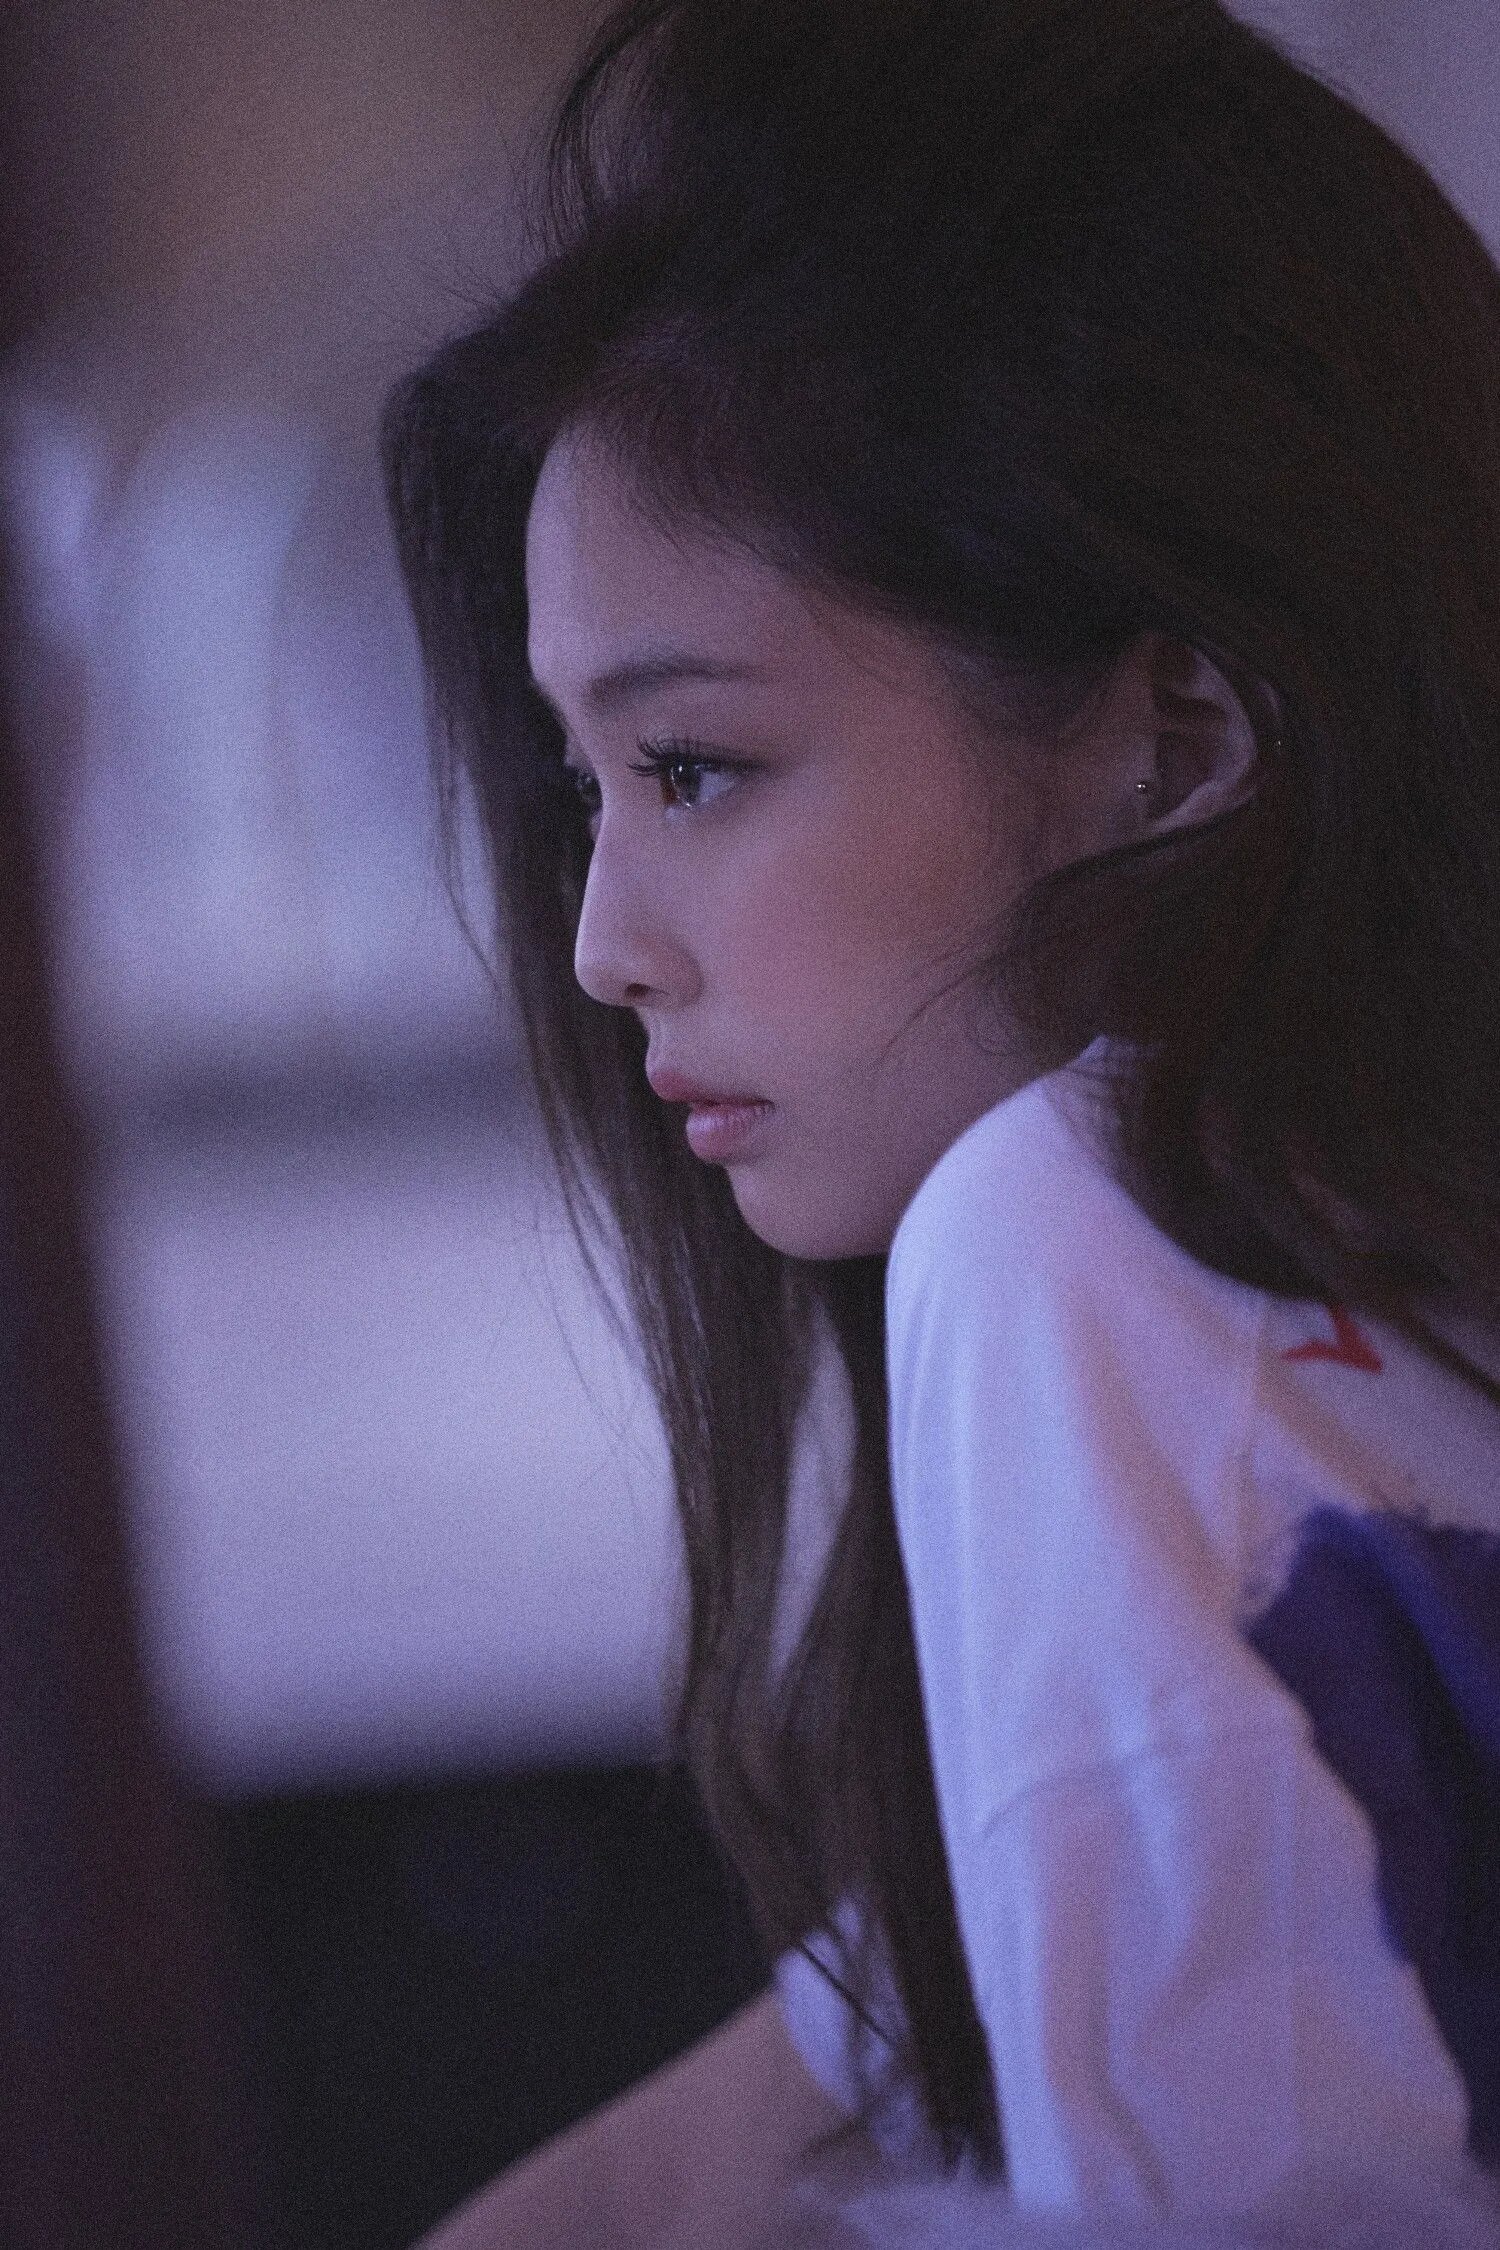 Behind the scenes BLACKPINK's Jennie 'SOLO' music video | Kpopping